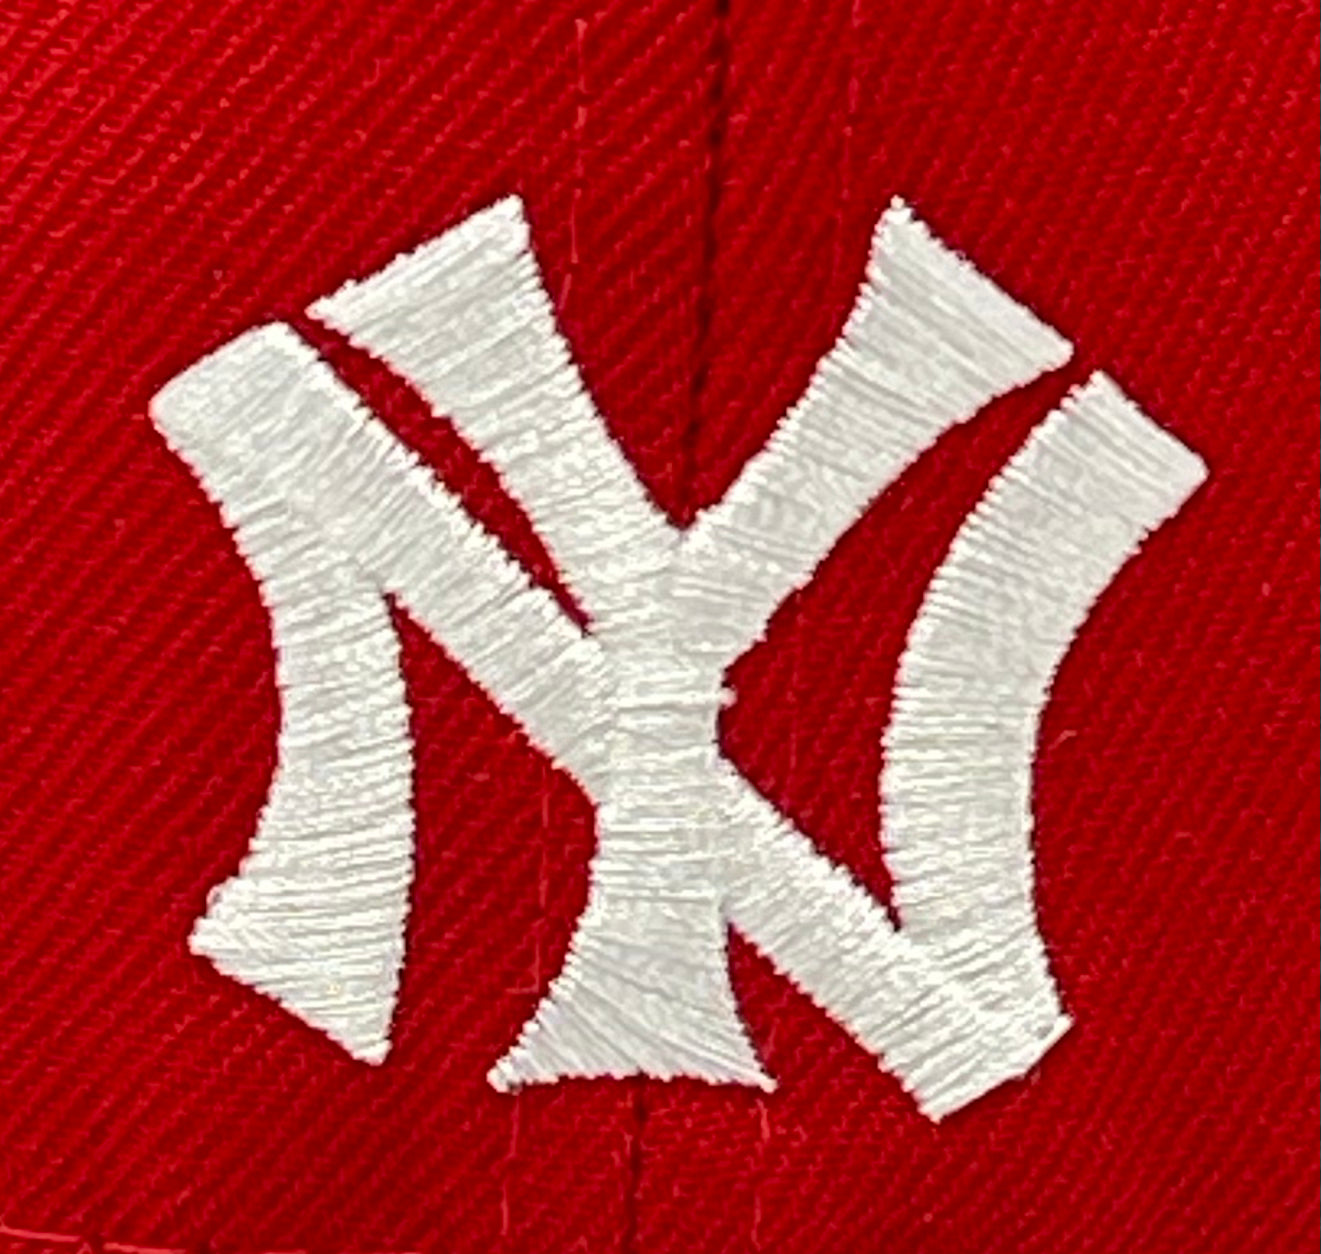 NEW YORK YANKEES (RED) (1927 WS) "MURDERS ROW LINEUP" NEW ERA 59FIFTY FITTED